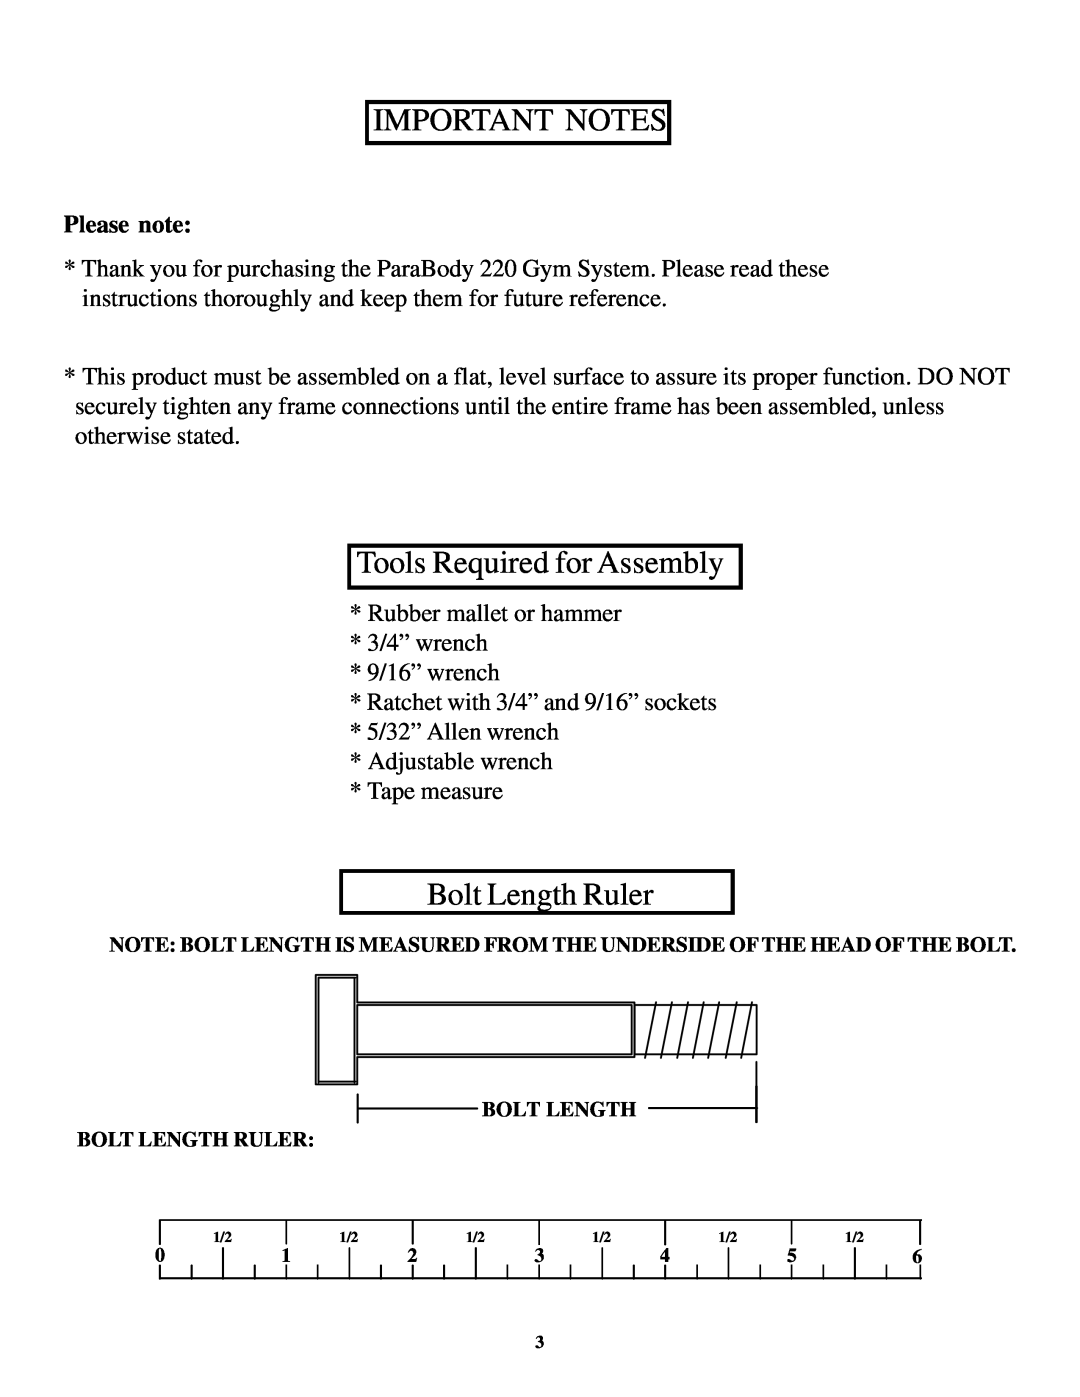 ParaBody 220 manual Important Notes, Tools Required for Assembly, Bolt Length Ruler, Please note 